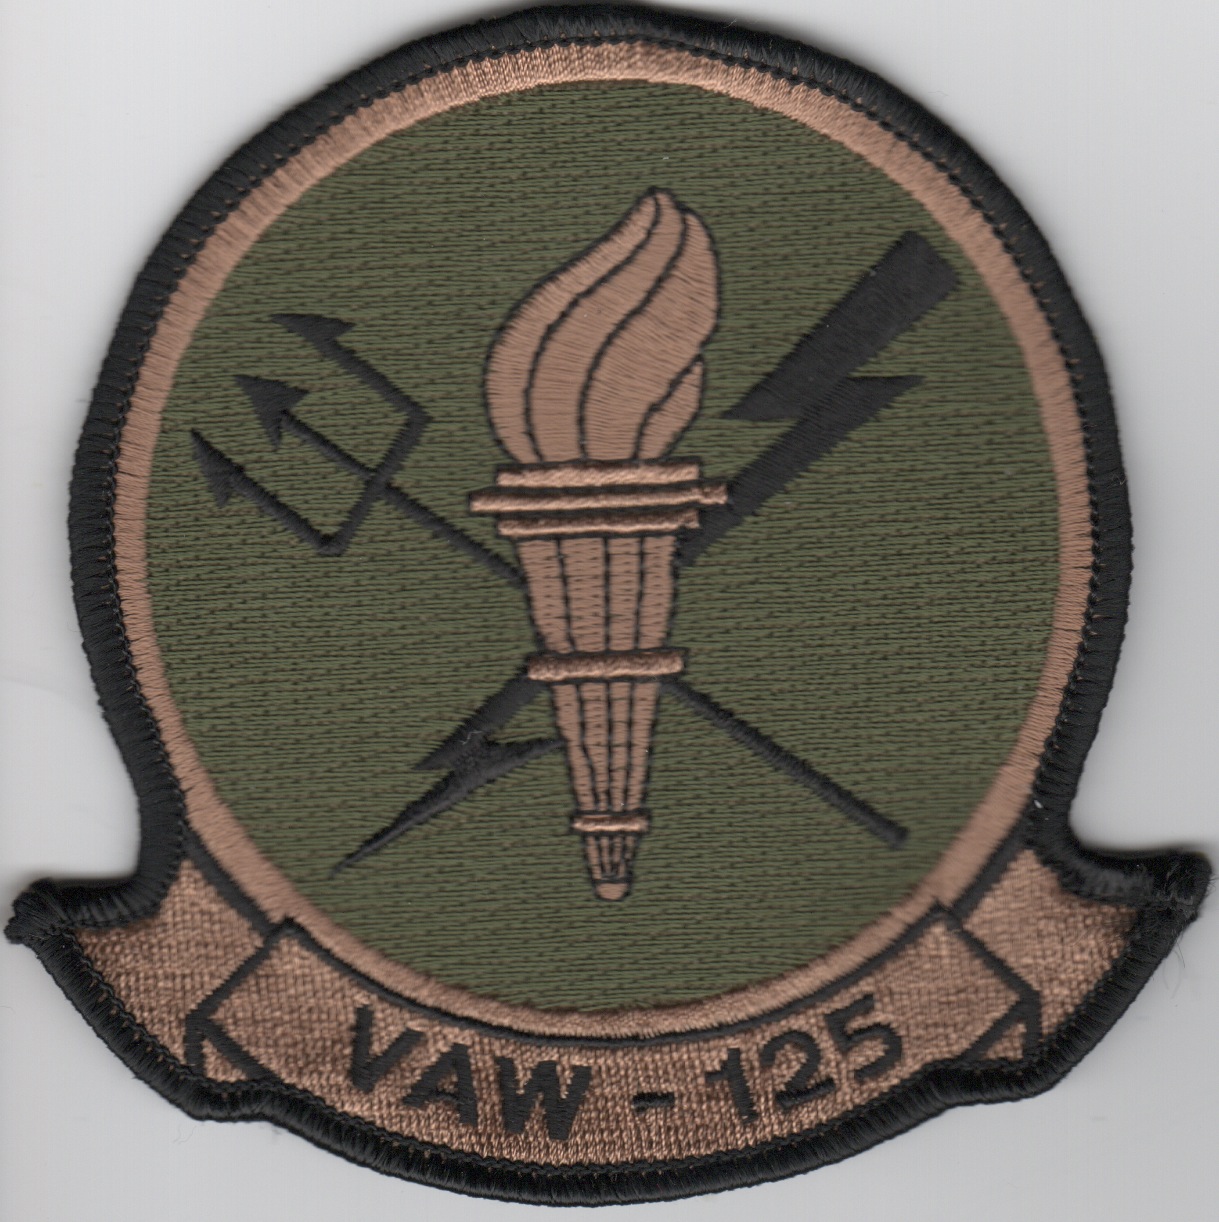 VAW-125 Squadron Patch (Subd)